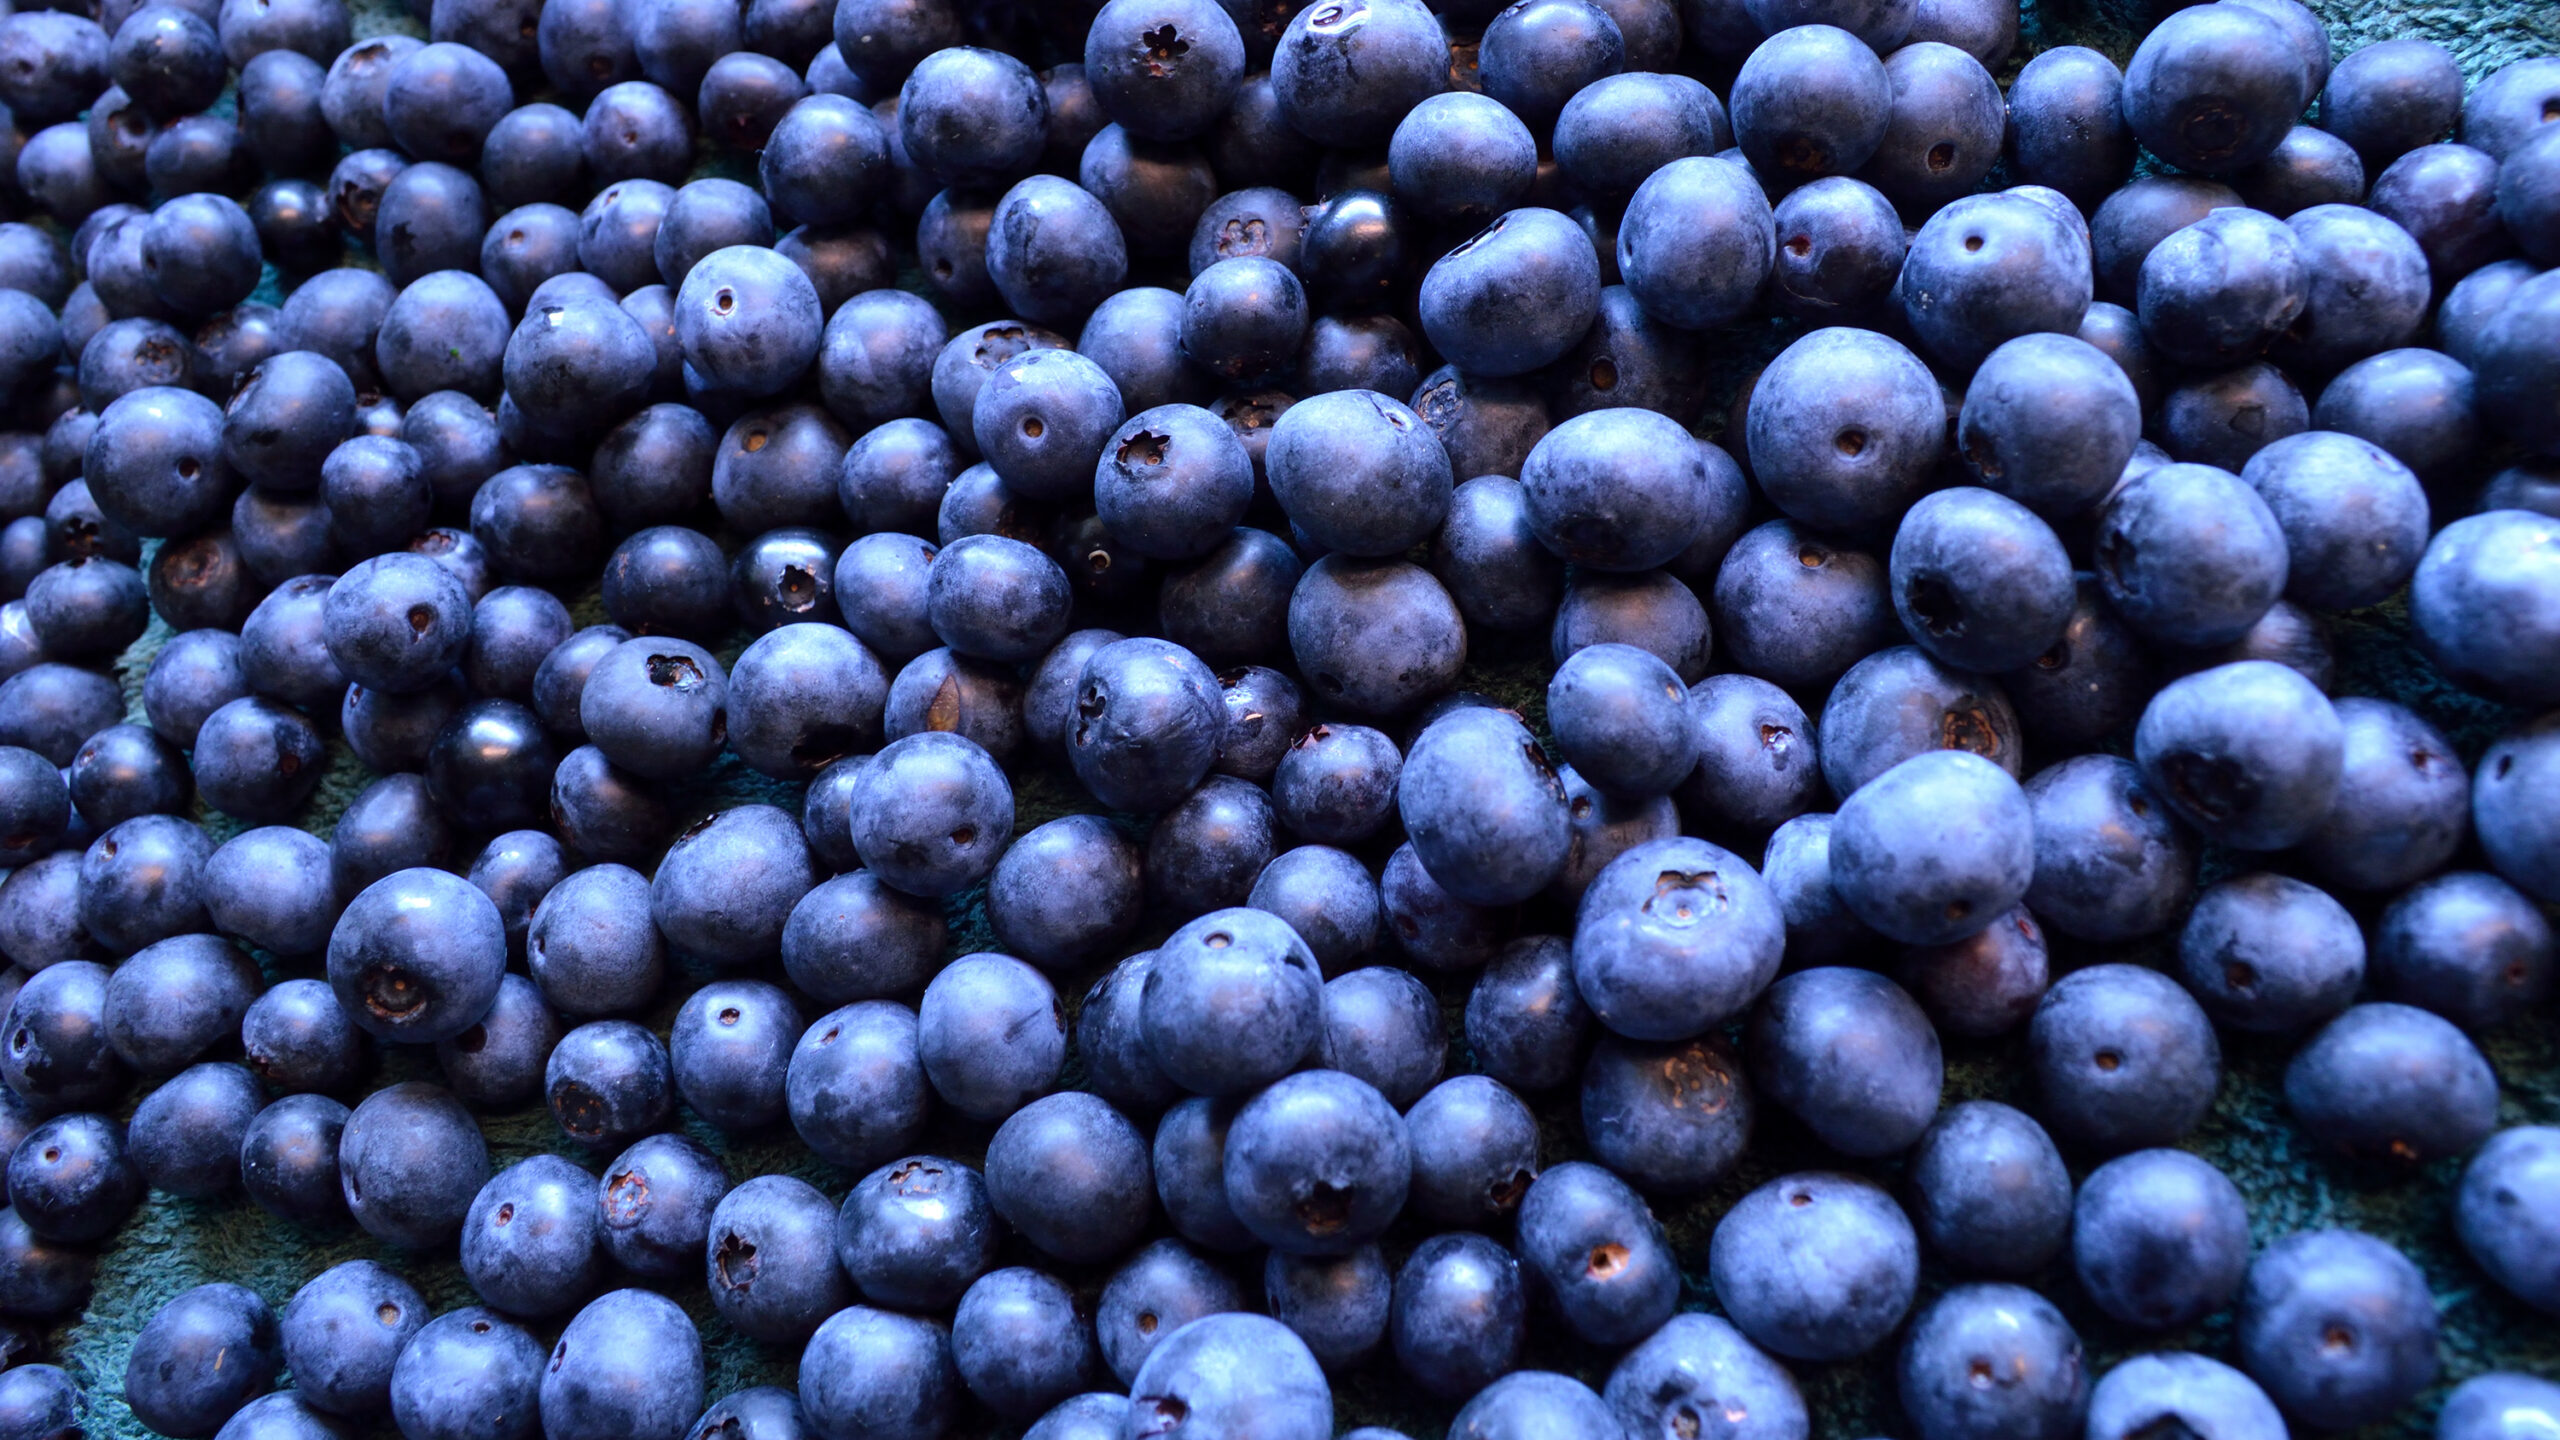 Blueberries May Help To Prolong Lifespans